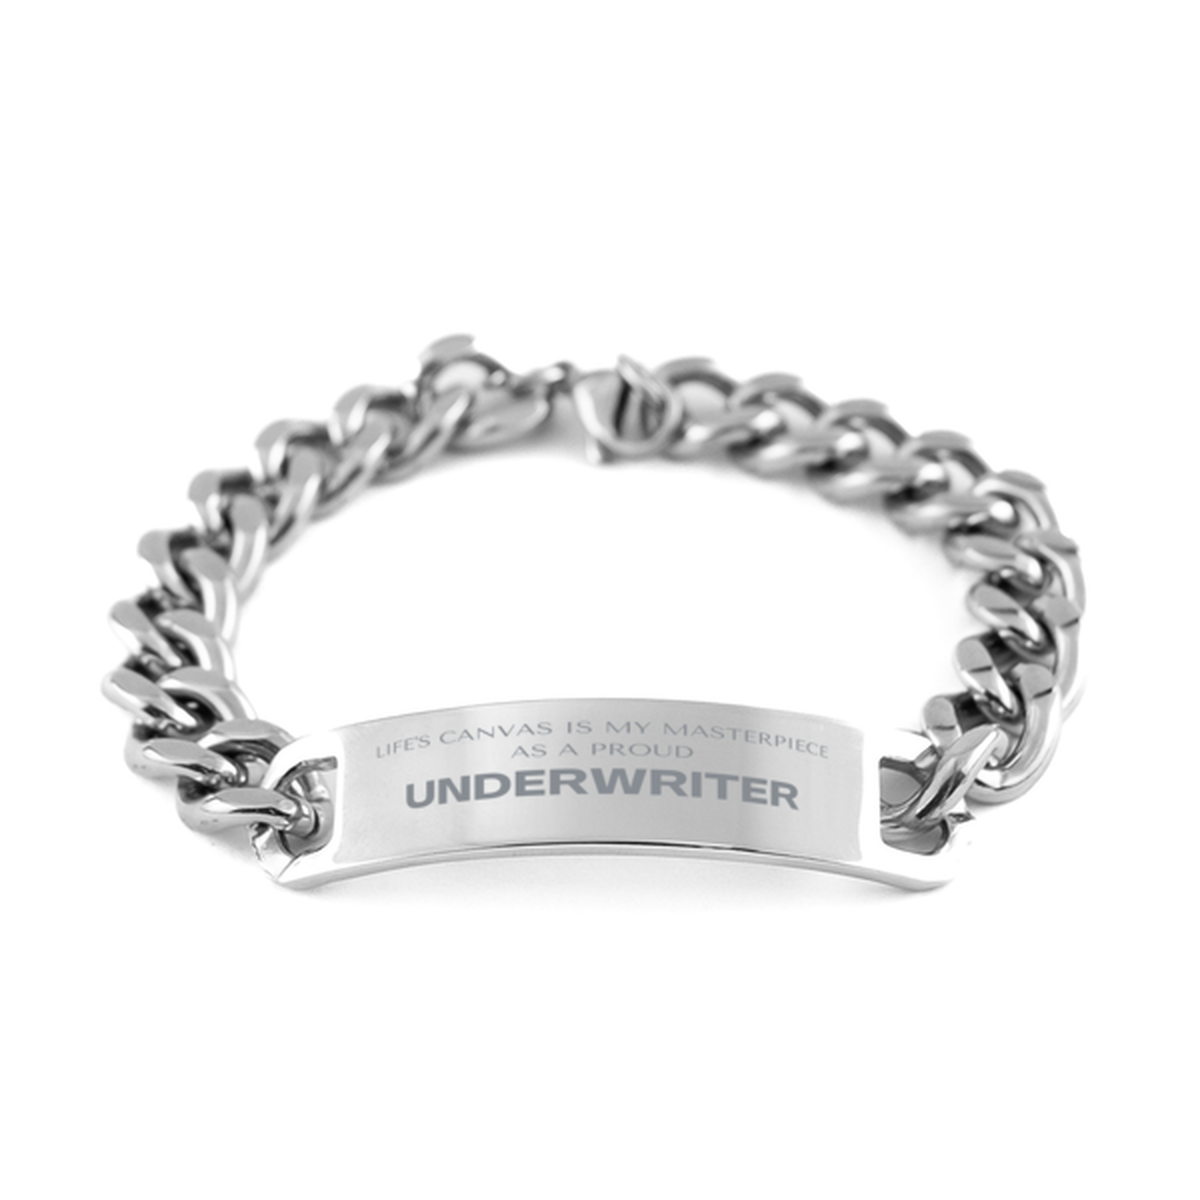 Proud Underwriter Gifts, Life's canvas is my masterpiece, Epic Birthday Christmas Unique Cuban Chain Stainless Steel Bracelet For Underwriter, Coworkers, Men, Women, Friends